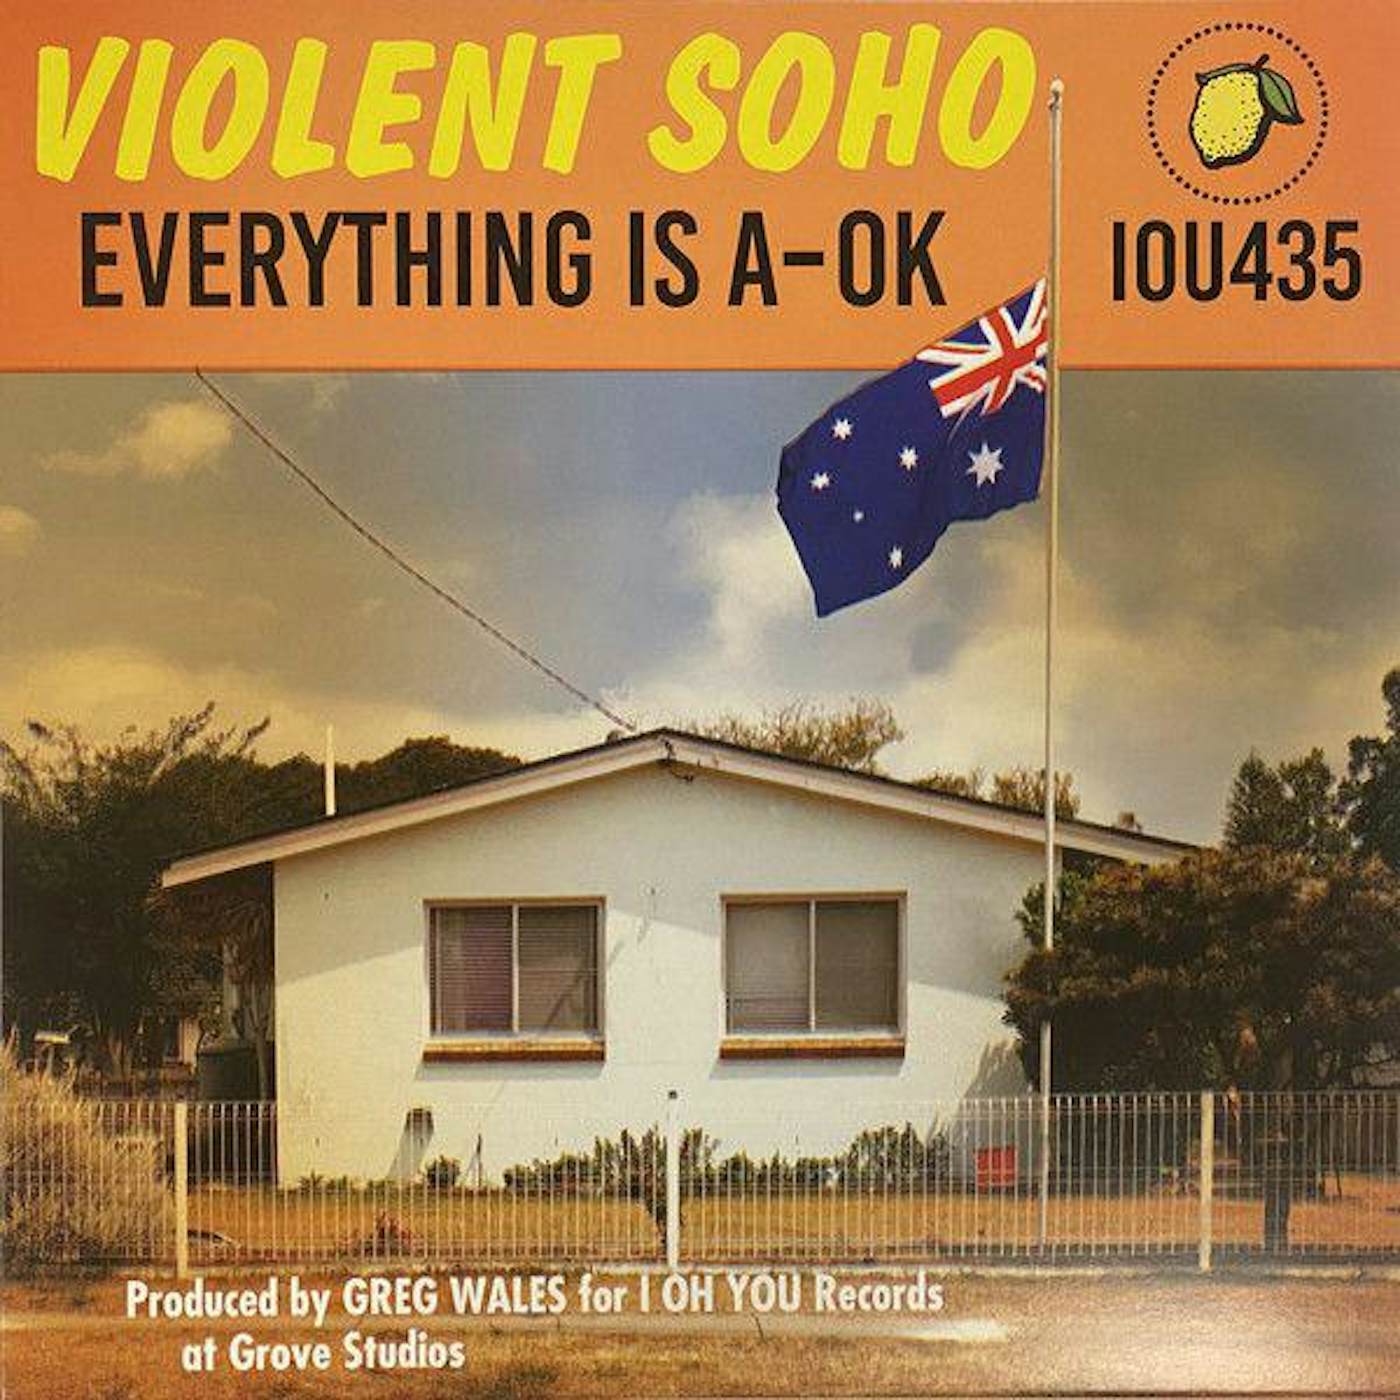 Violent Soho EVERYTHING IS A-OK Vinyl Record (Glow In The Dark)